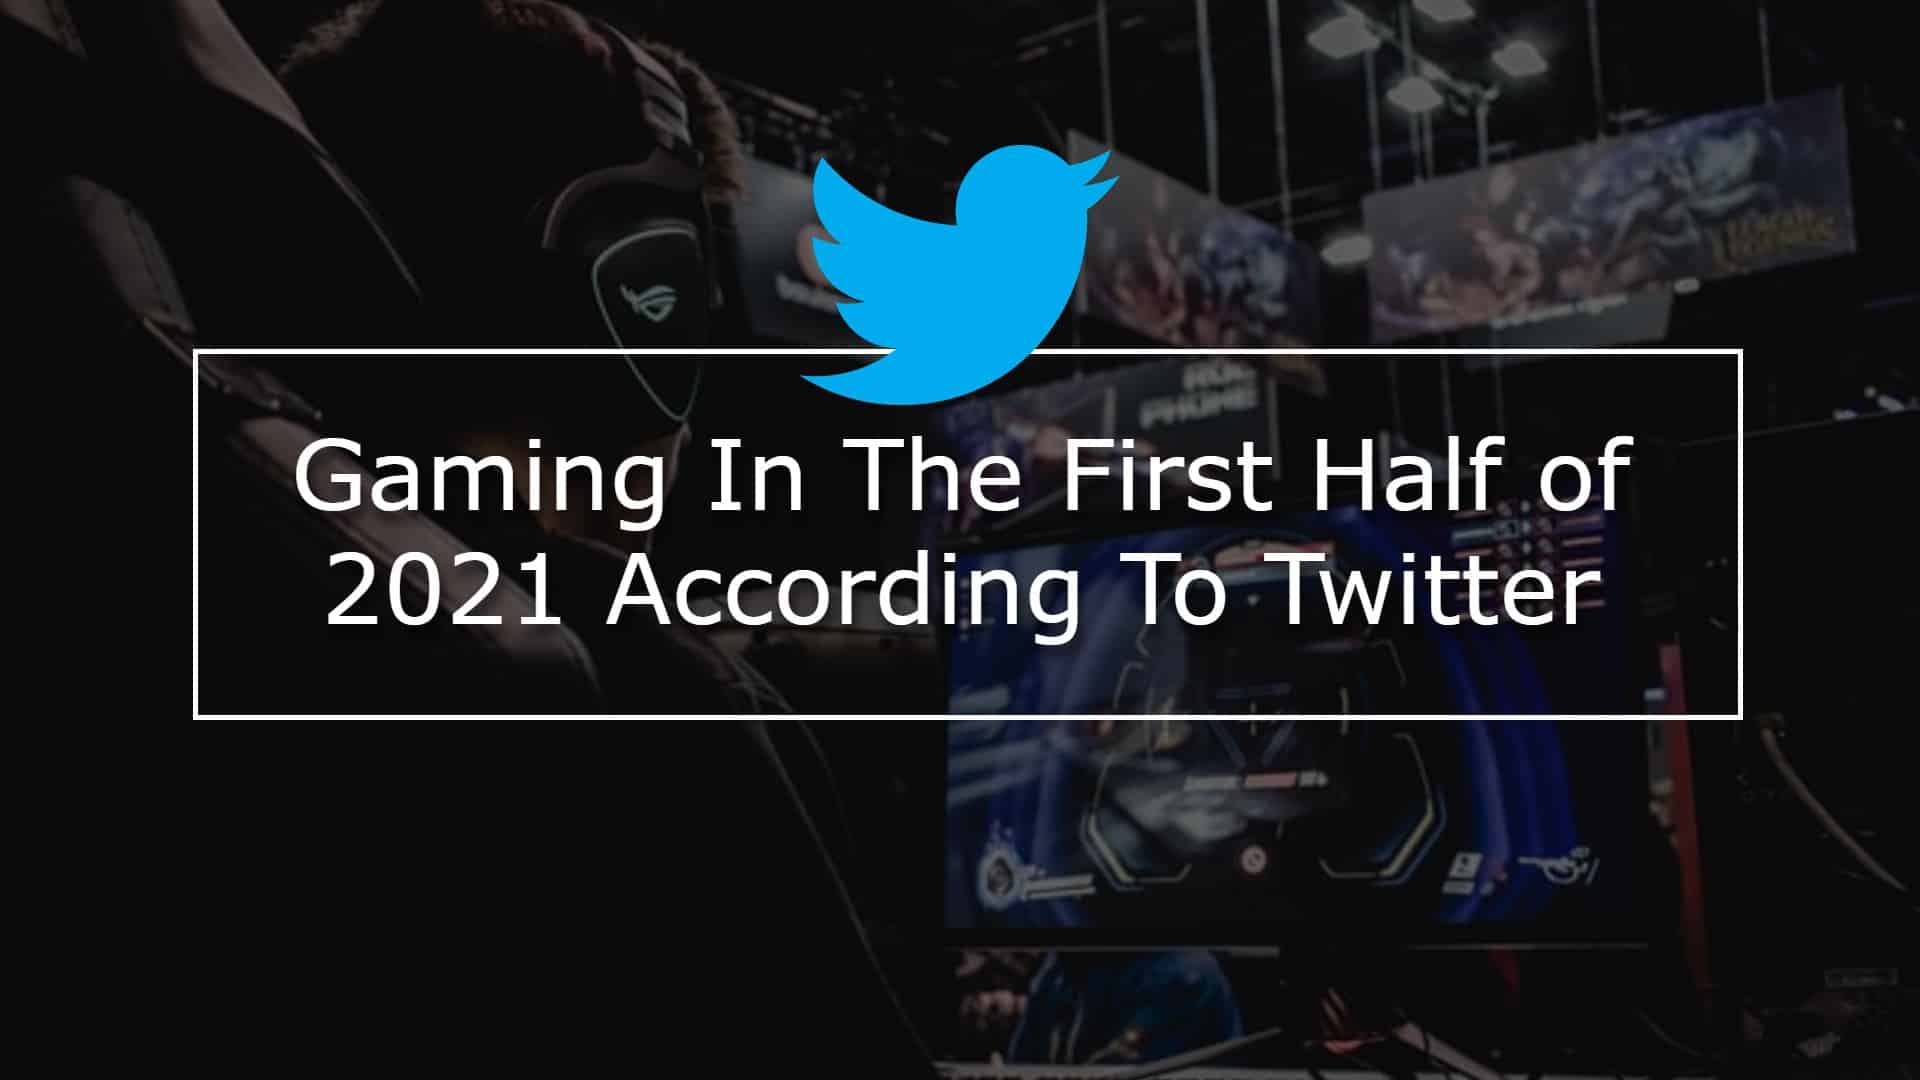 Gaming In The First Half of 2021 According To Twitter